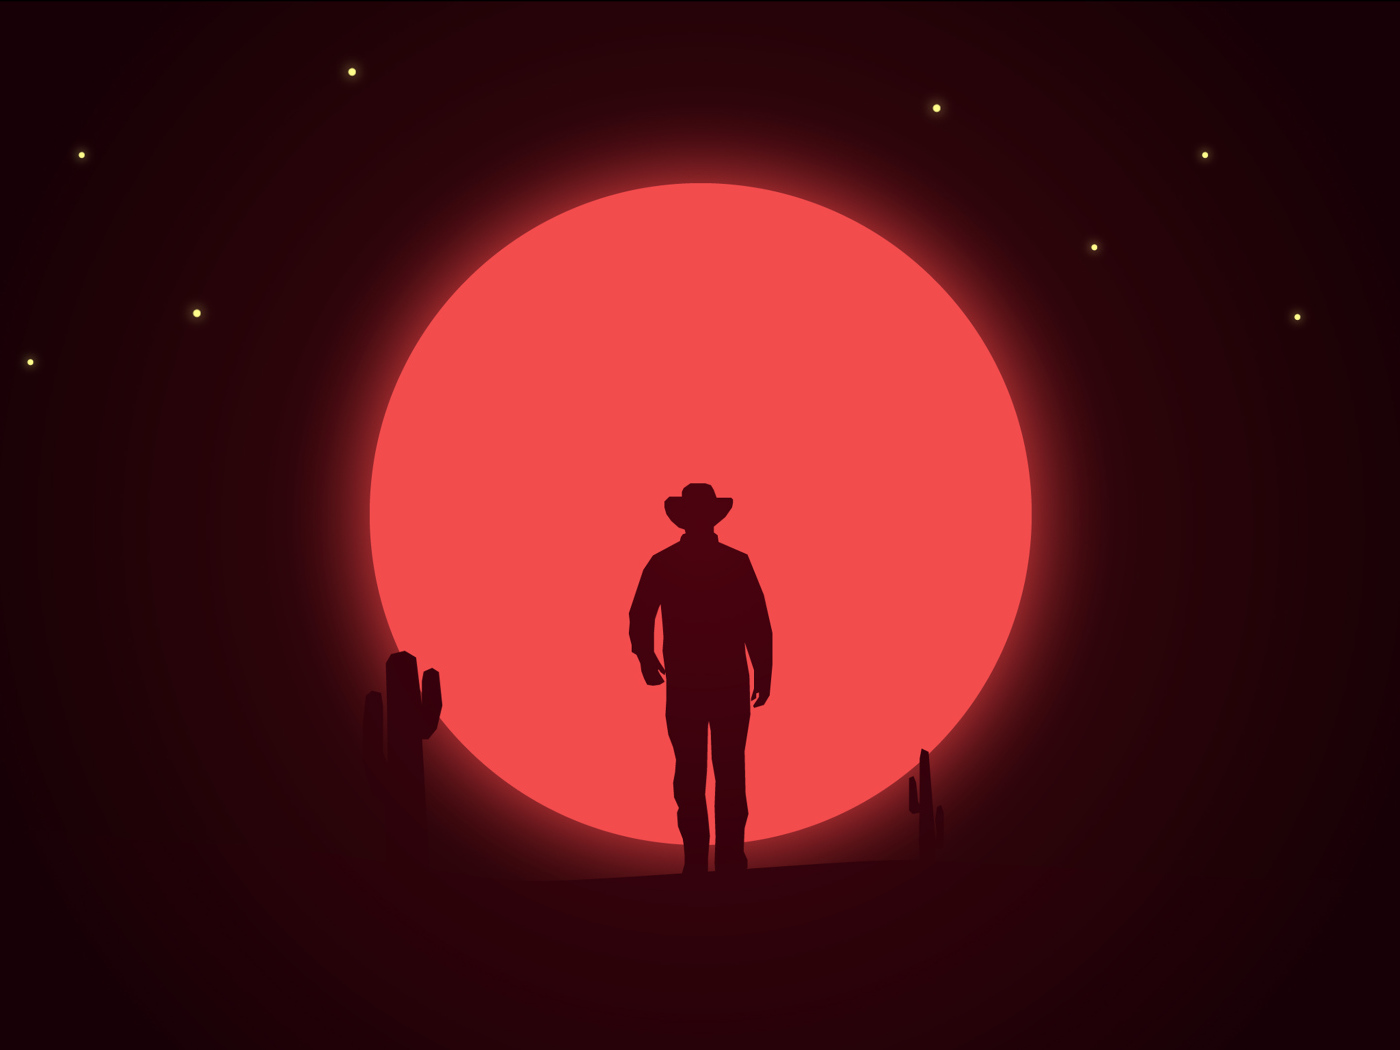 Silhouette of a cowboy on a background of the red moon